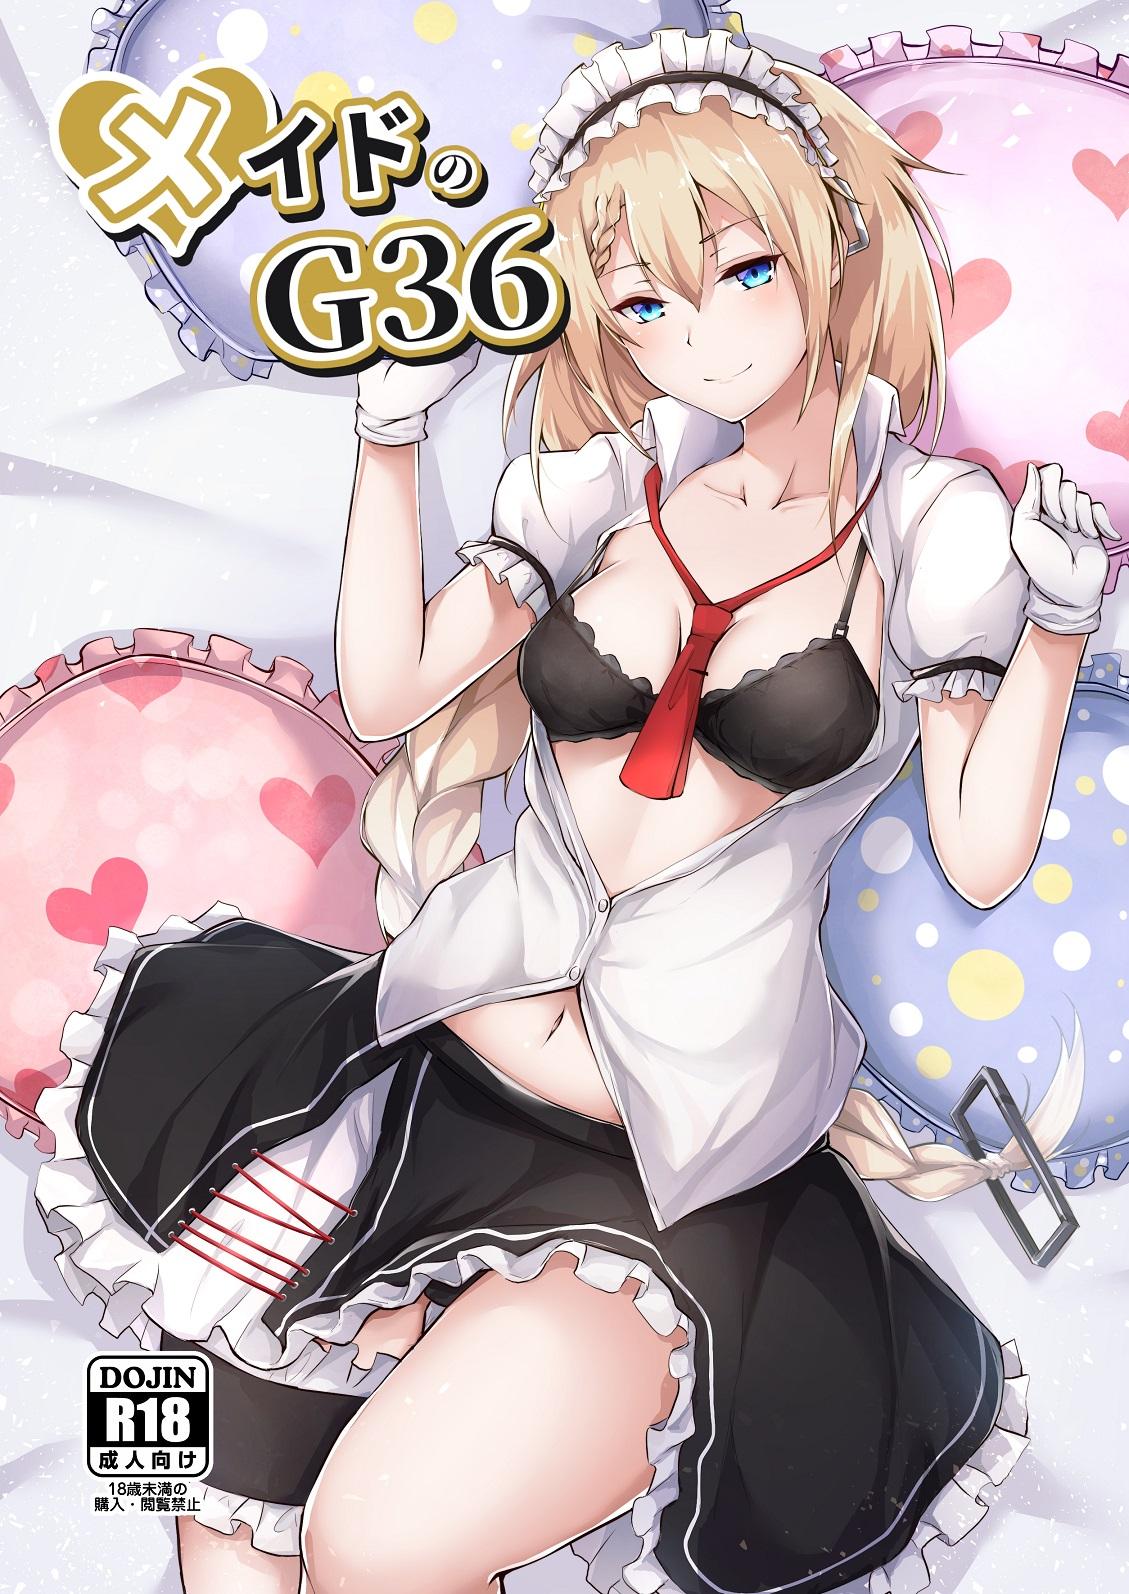 Milfs Maid no G36 - Girls frontline Phat Ass - Page 1